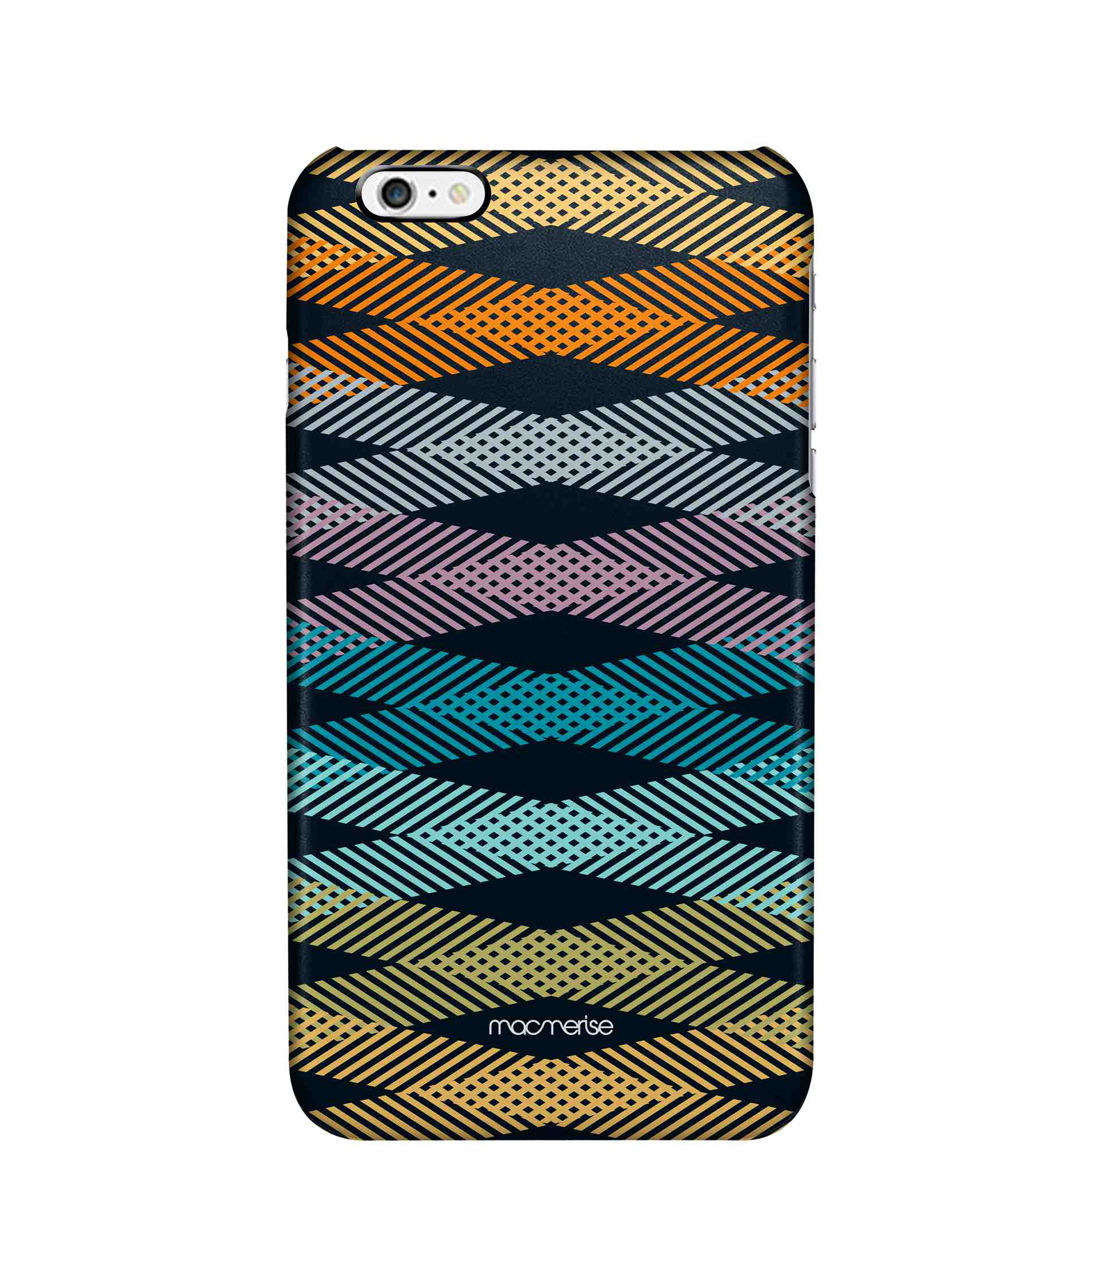 Intertwined - Sleek Case for iPhone 6S Plus